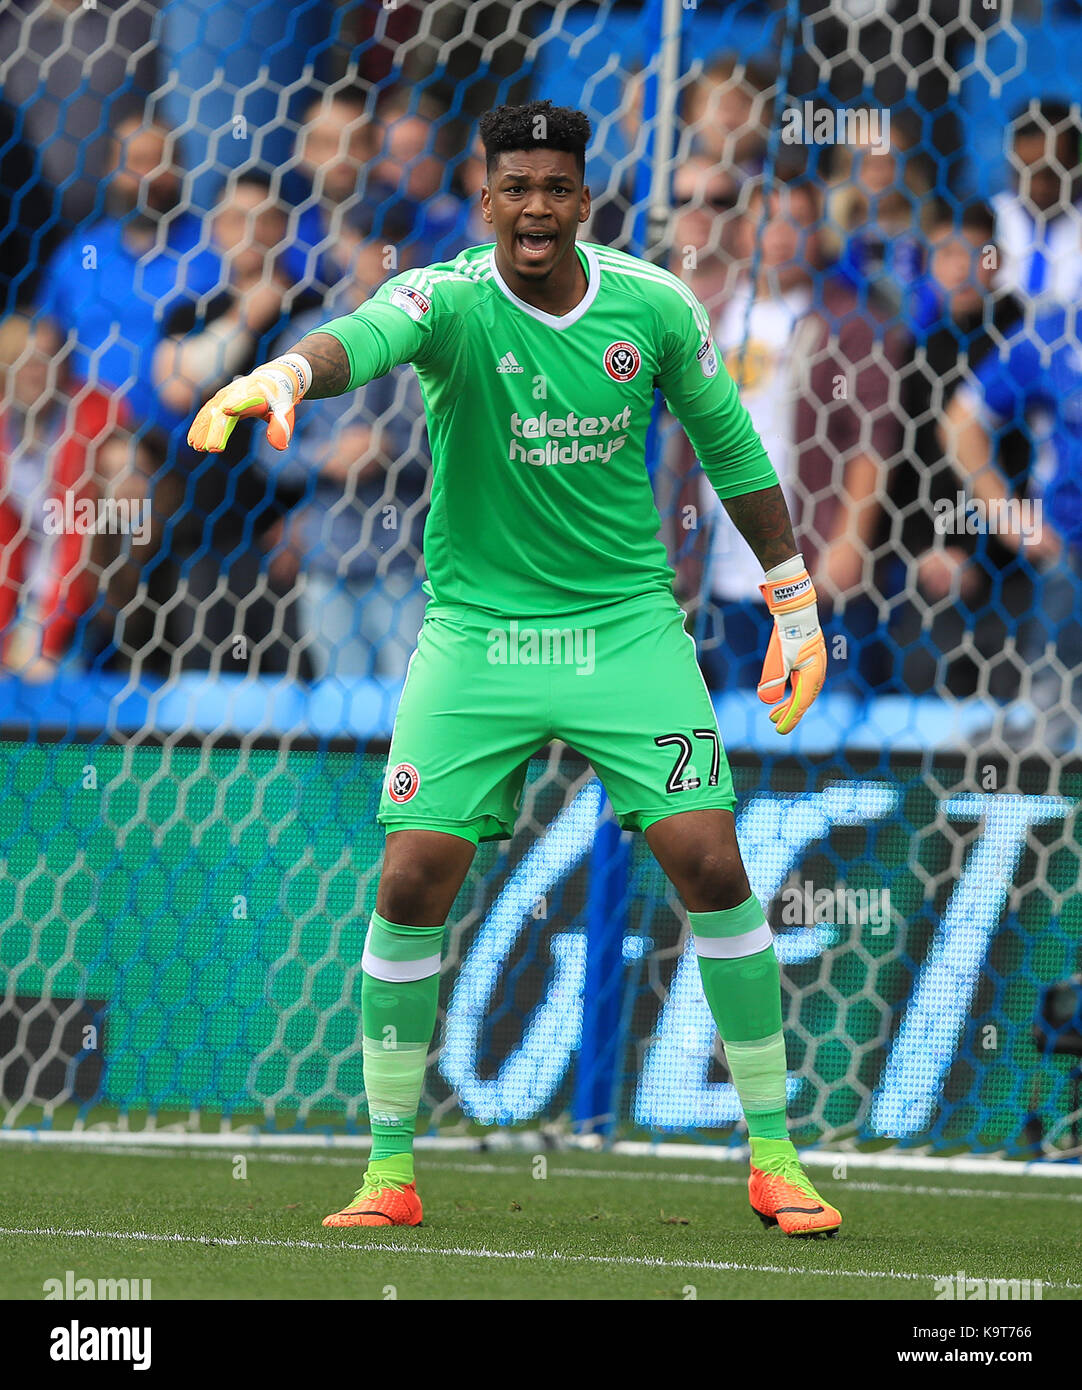 Sheffield United goalkeeper Jamal Blackman during the Sky Bet Championship match at Hillsborough, Sheffield. PRESS ASSOCIATION Photo. Picture date: Sunday September 24, 2017. See PA story SOCCER Sheff Wed. Photo credit should read: Mike Egerton/PA Wire. RESTRICTIONS: EDITORIAL USE ONLY No use with unauthorised audio, video, data, fixture lists, club/league logos or 'live' services. Online in-match use limited to 75 images, no video emulation. No use in betting, games or single club/league/player publications. Stock Photo